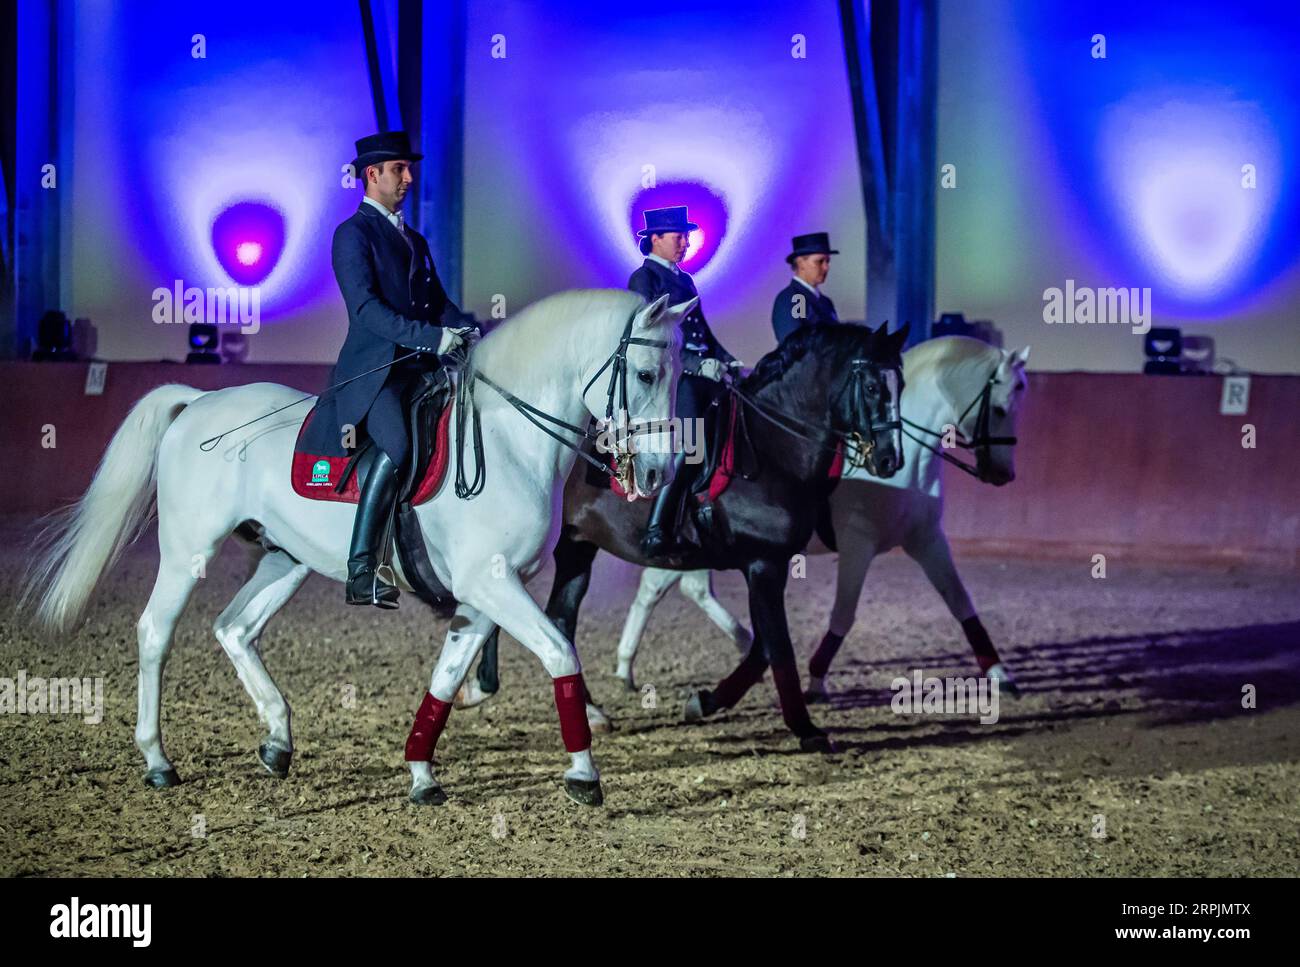 191215 -- DAKOVO, Dec. 15, 2019 -- Lipizzaner horses perform during the Lipizzaner Christmas Ball at State Stud Farm in Dakovo, eastern Croatia, Dec. 14, 2019. The Lipizzaner Christmas Ball is a Baroque musical-stage show with Lipizzaner horses. /Pixsell via Xinhua CROATIA-DAKOVO-LIPIZZANER CHRISTMAS BALL DavorxJavorovic PUBLICATIONxNOTxINxCHN Stock Photo